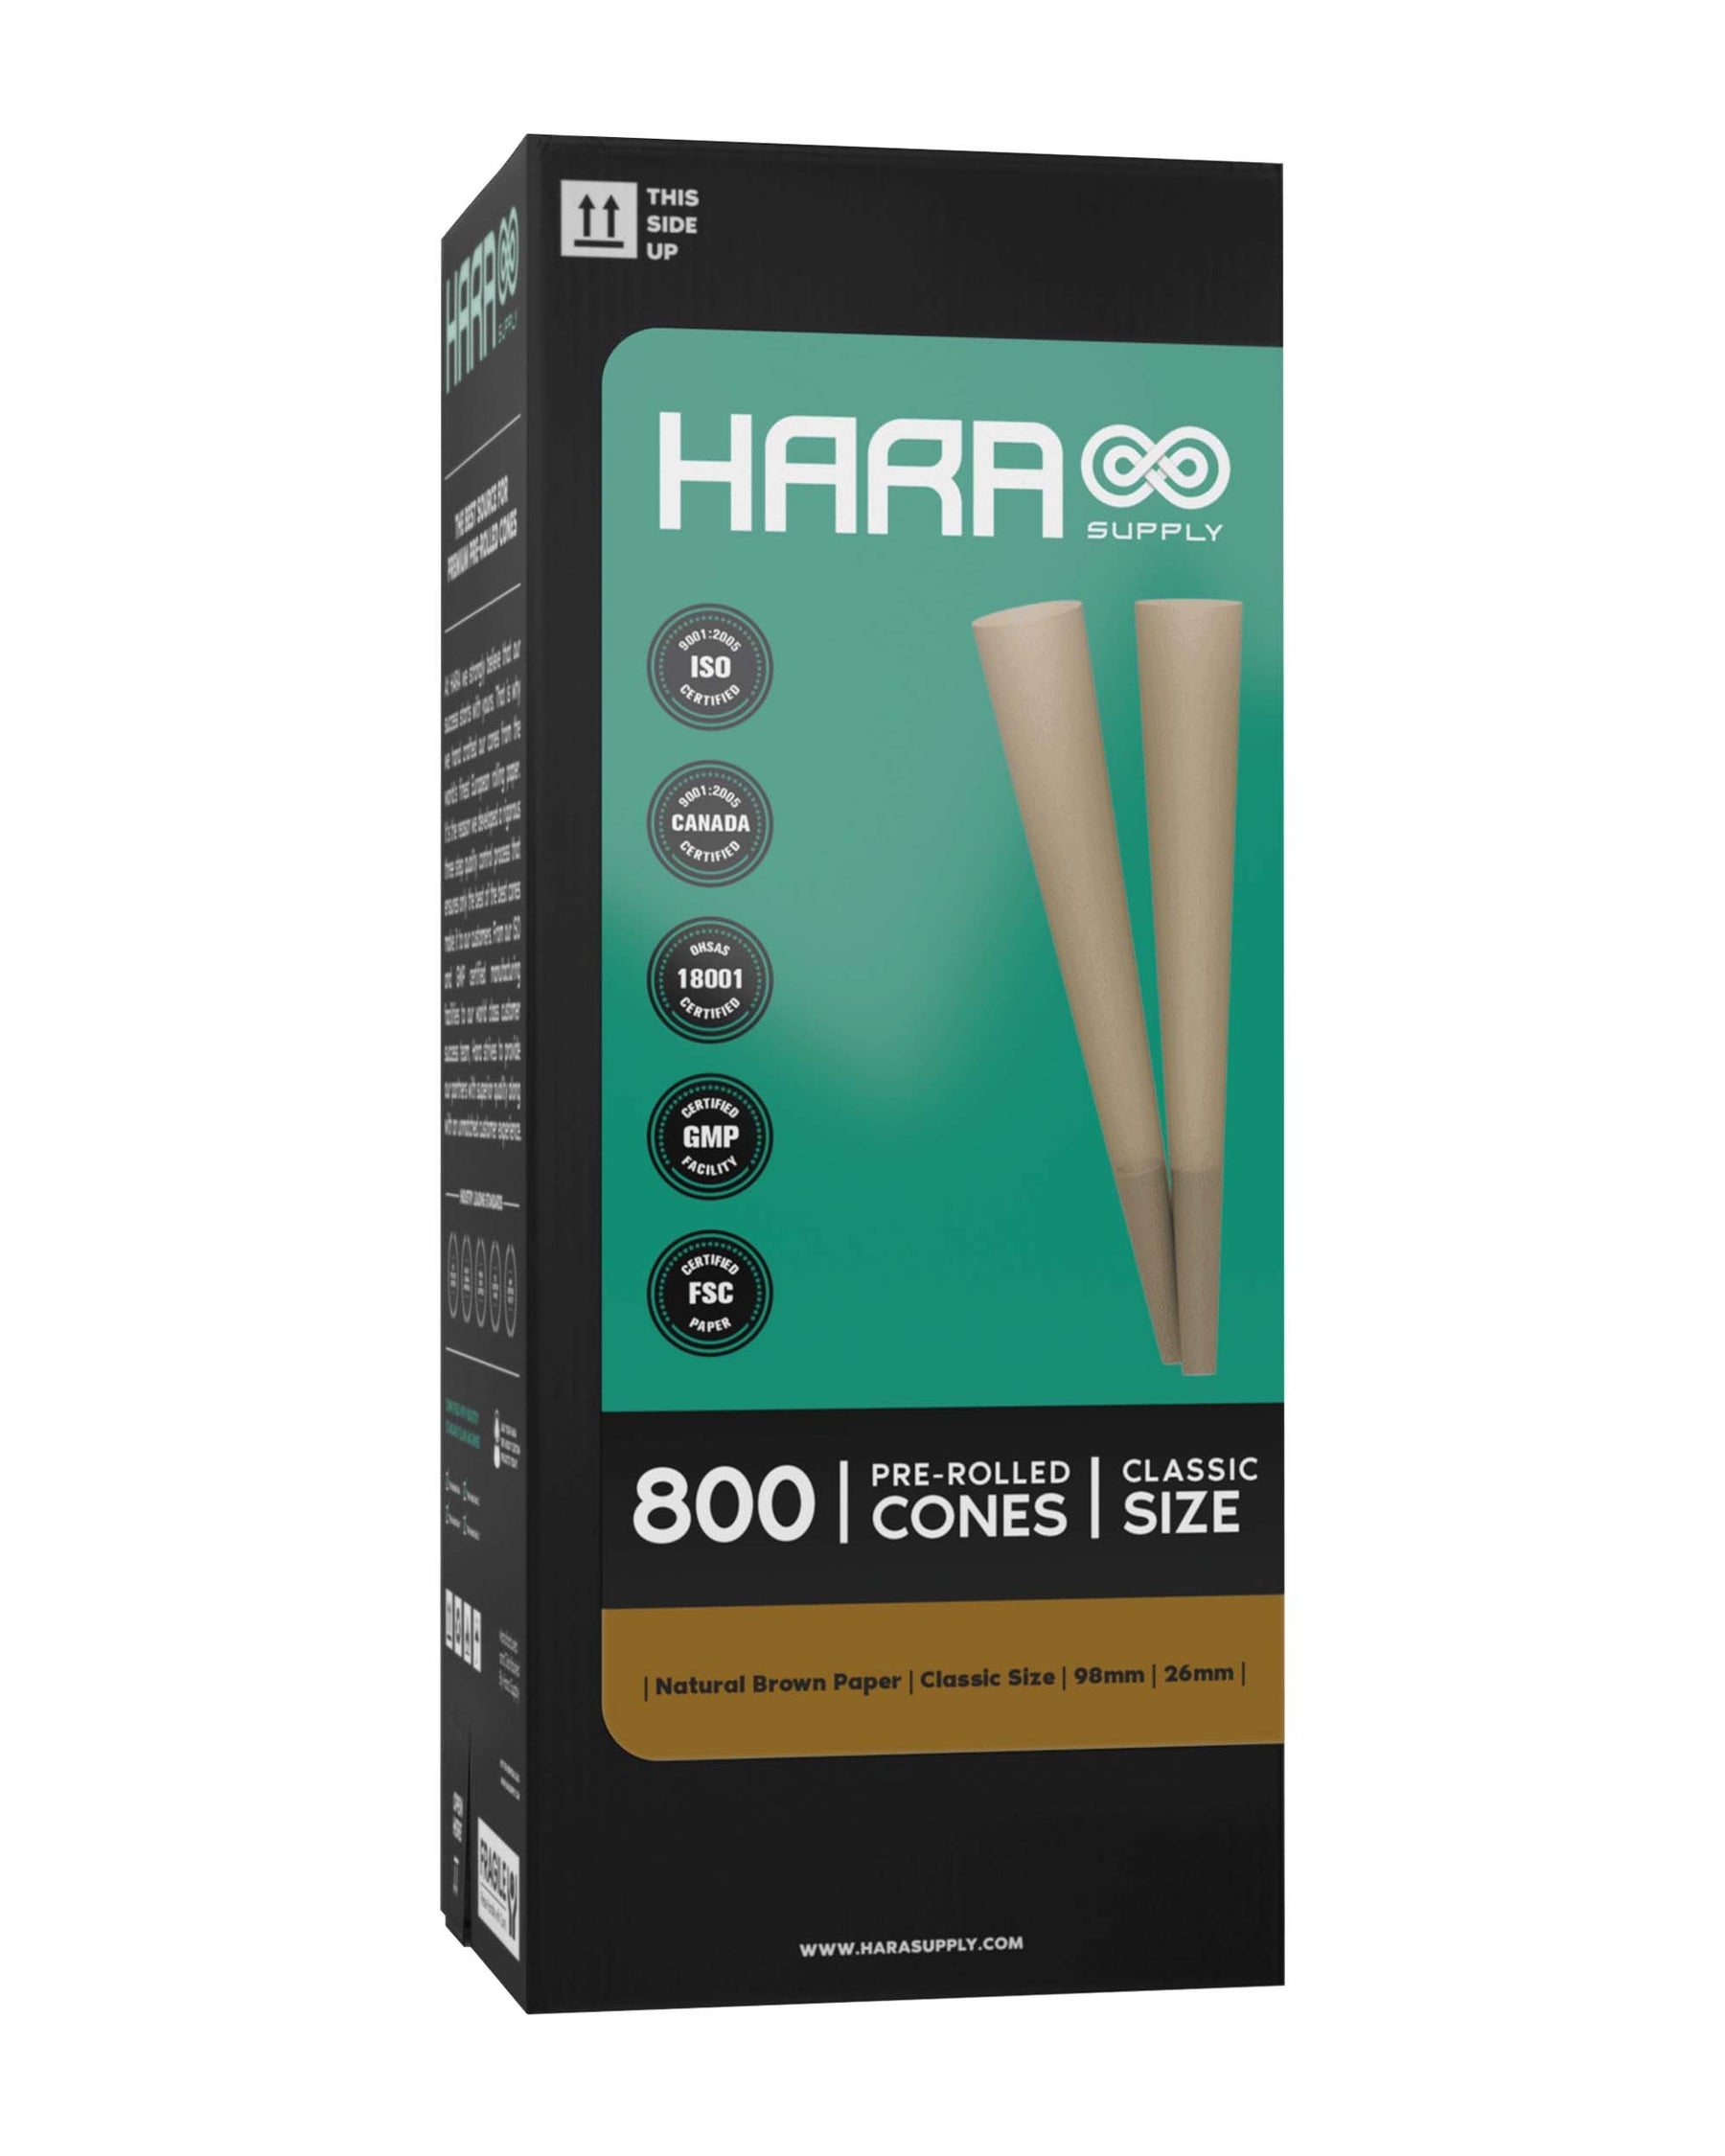 Hara Supply 98mm Classic Size Unbleached Brown Pre Rolled Cones w/ Filter Tip 800/Box